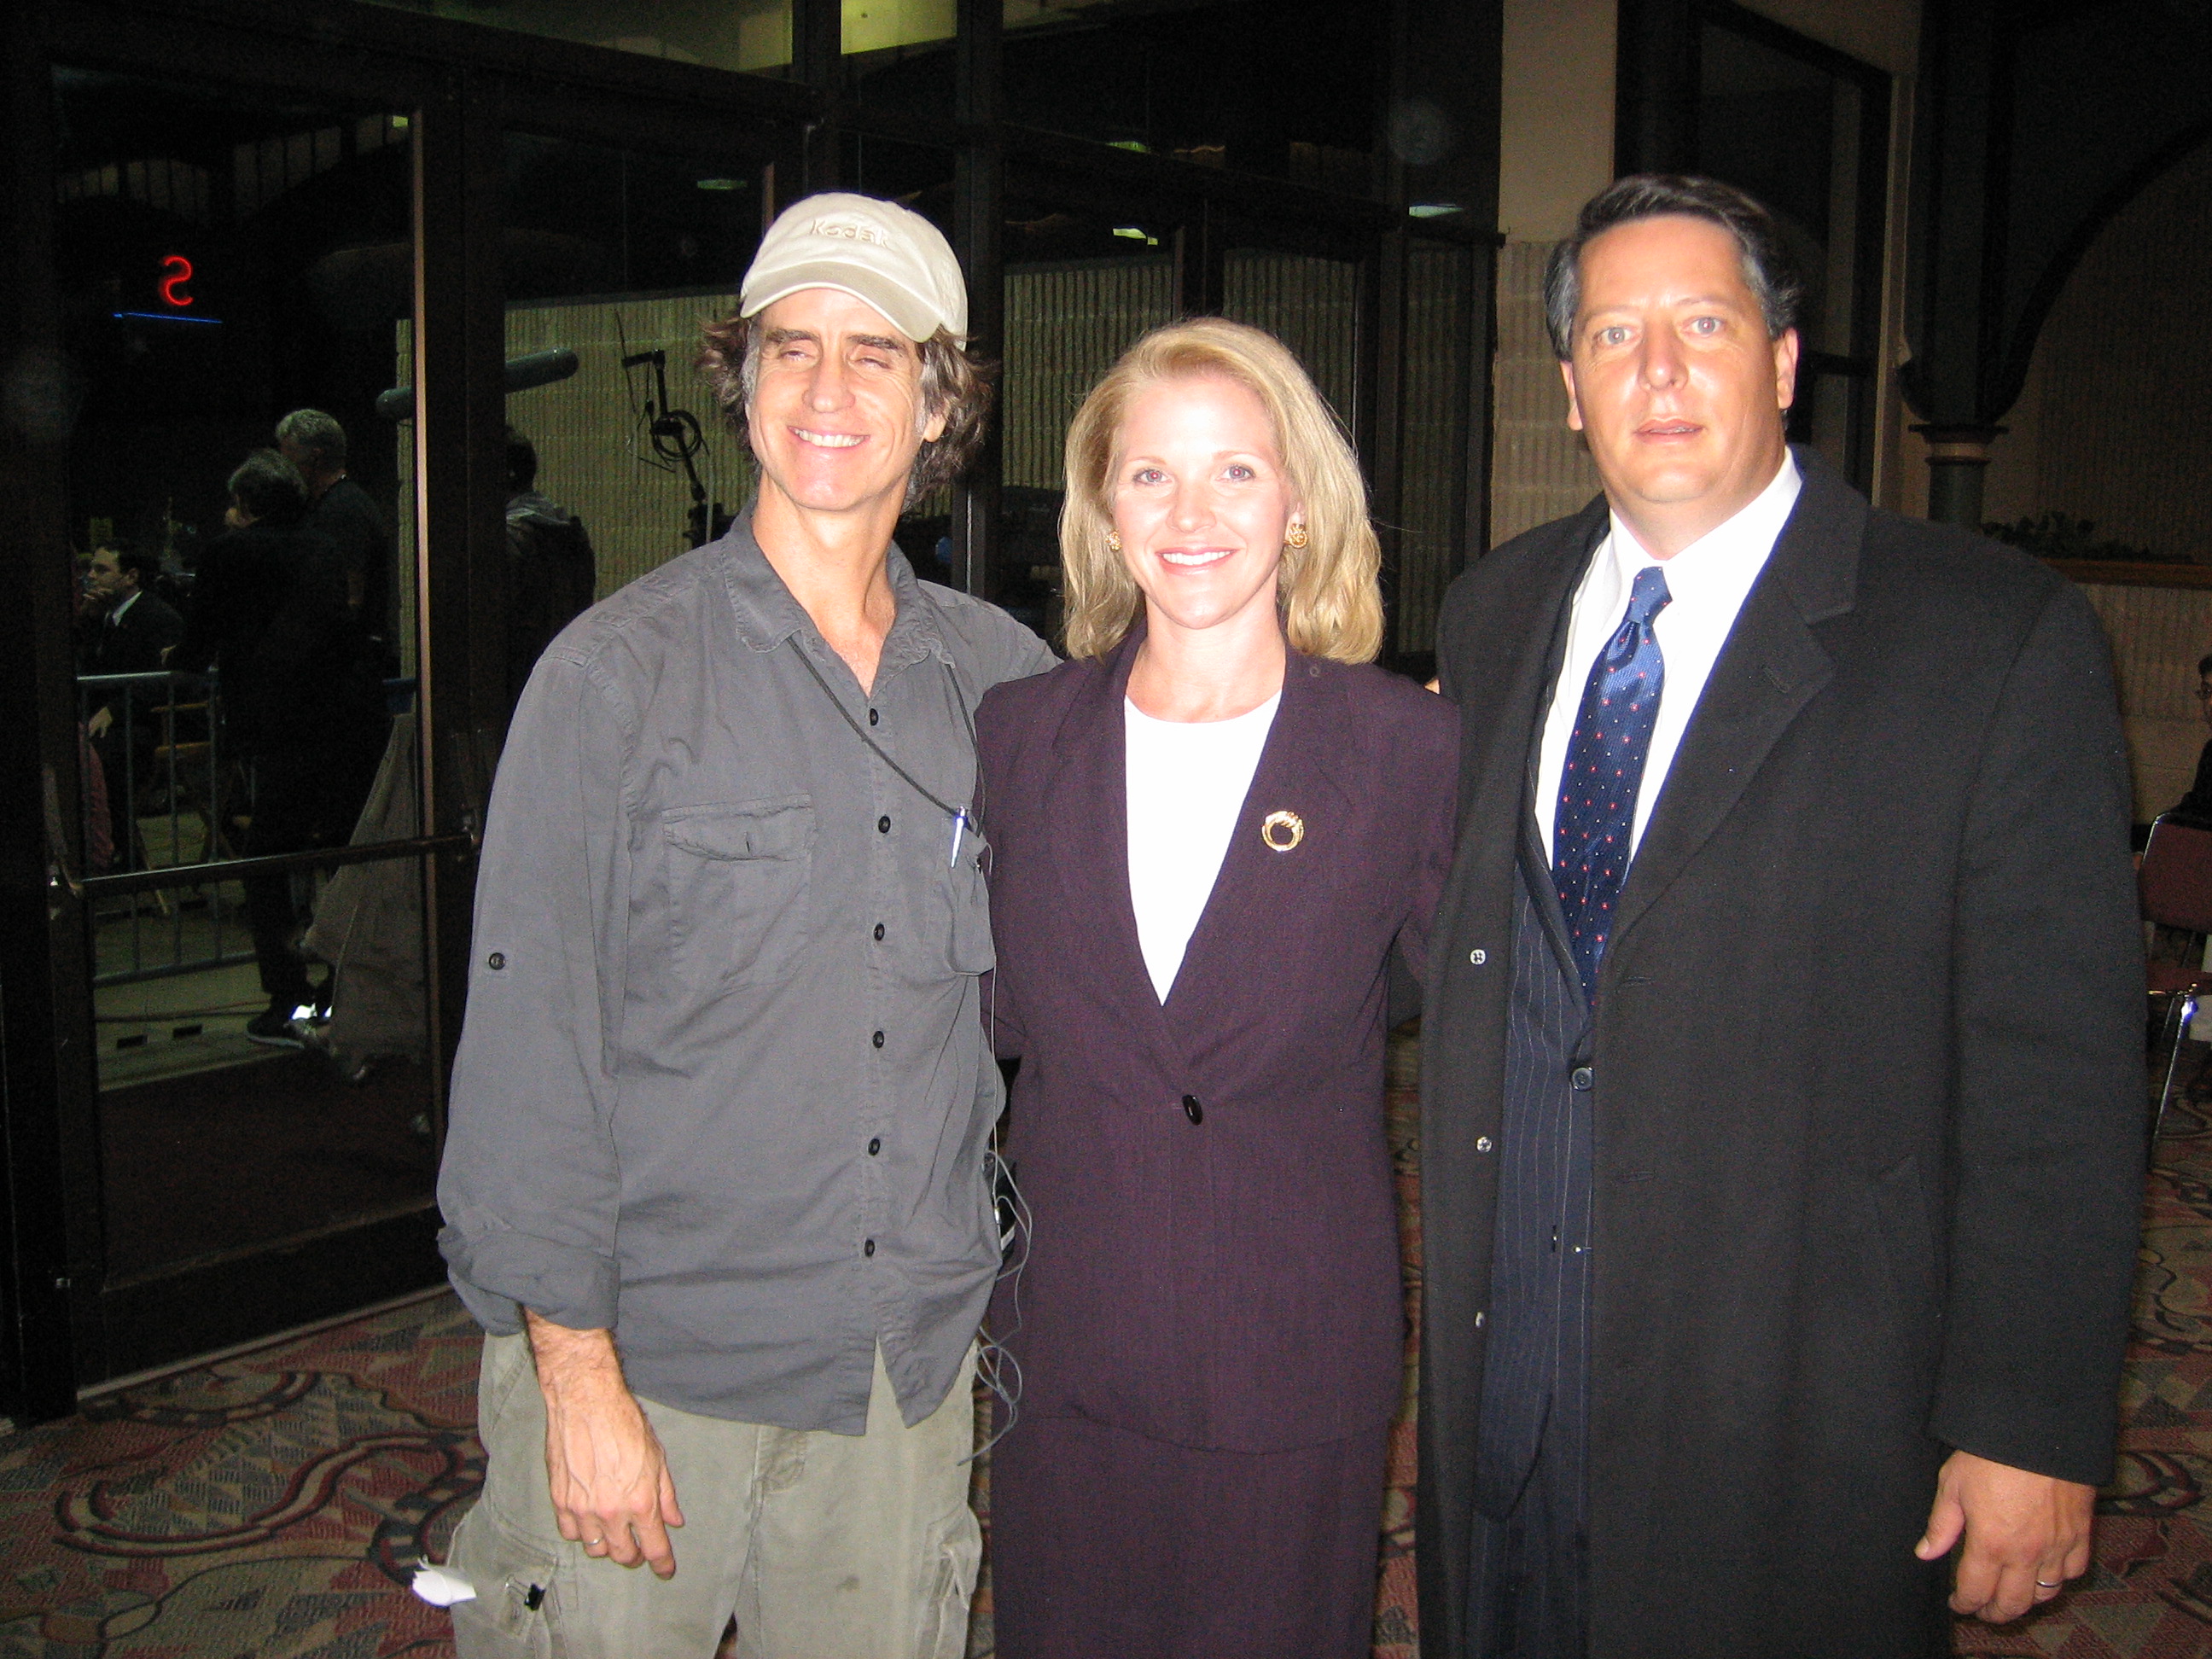 As Tipper Gore with Al Gore and the awesome Director, Jay Roach.